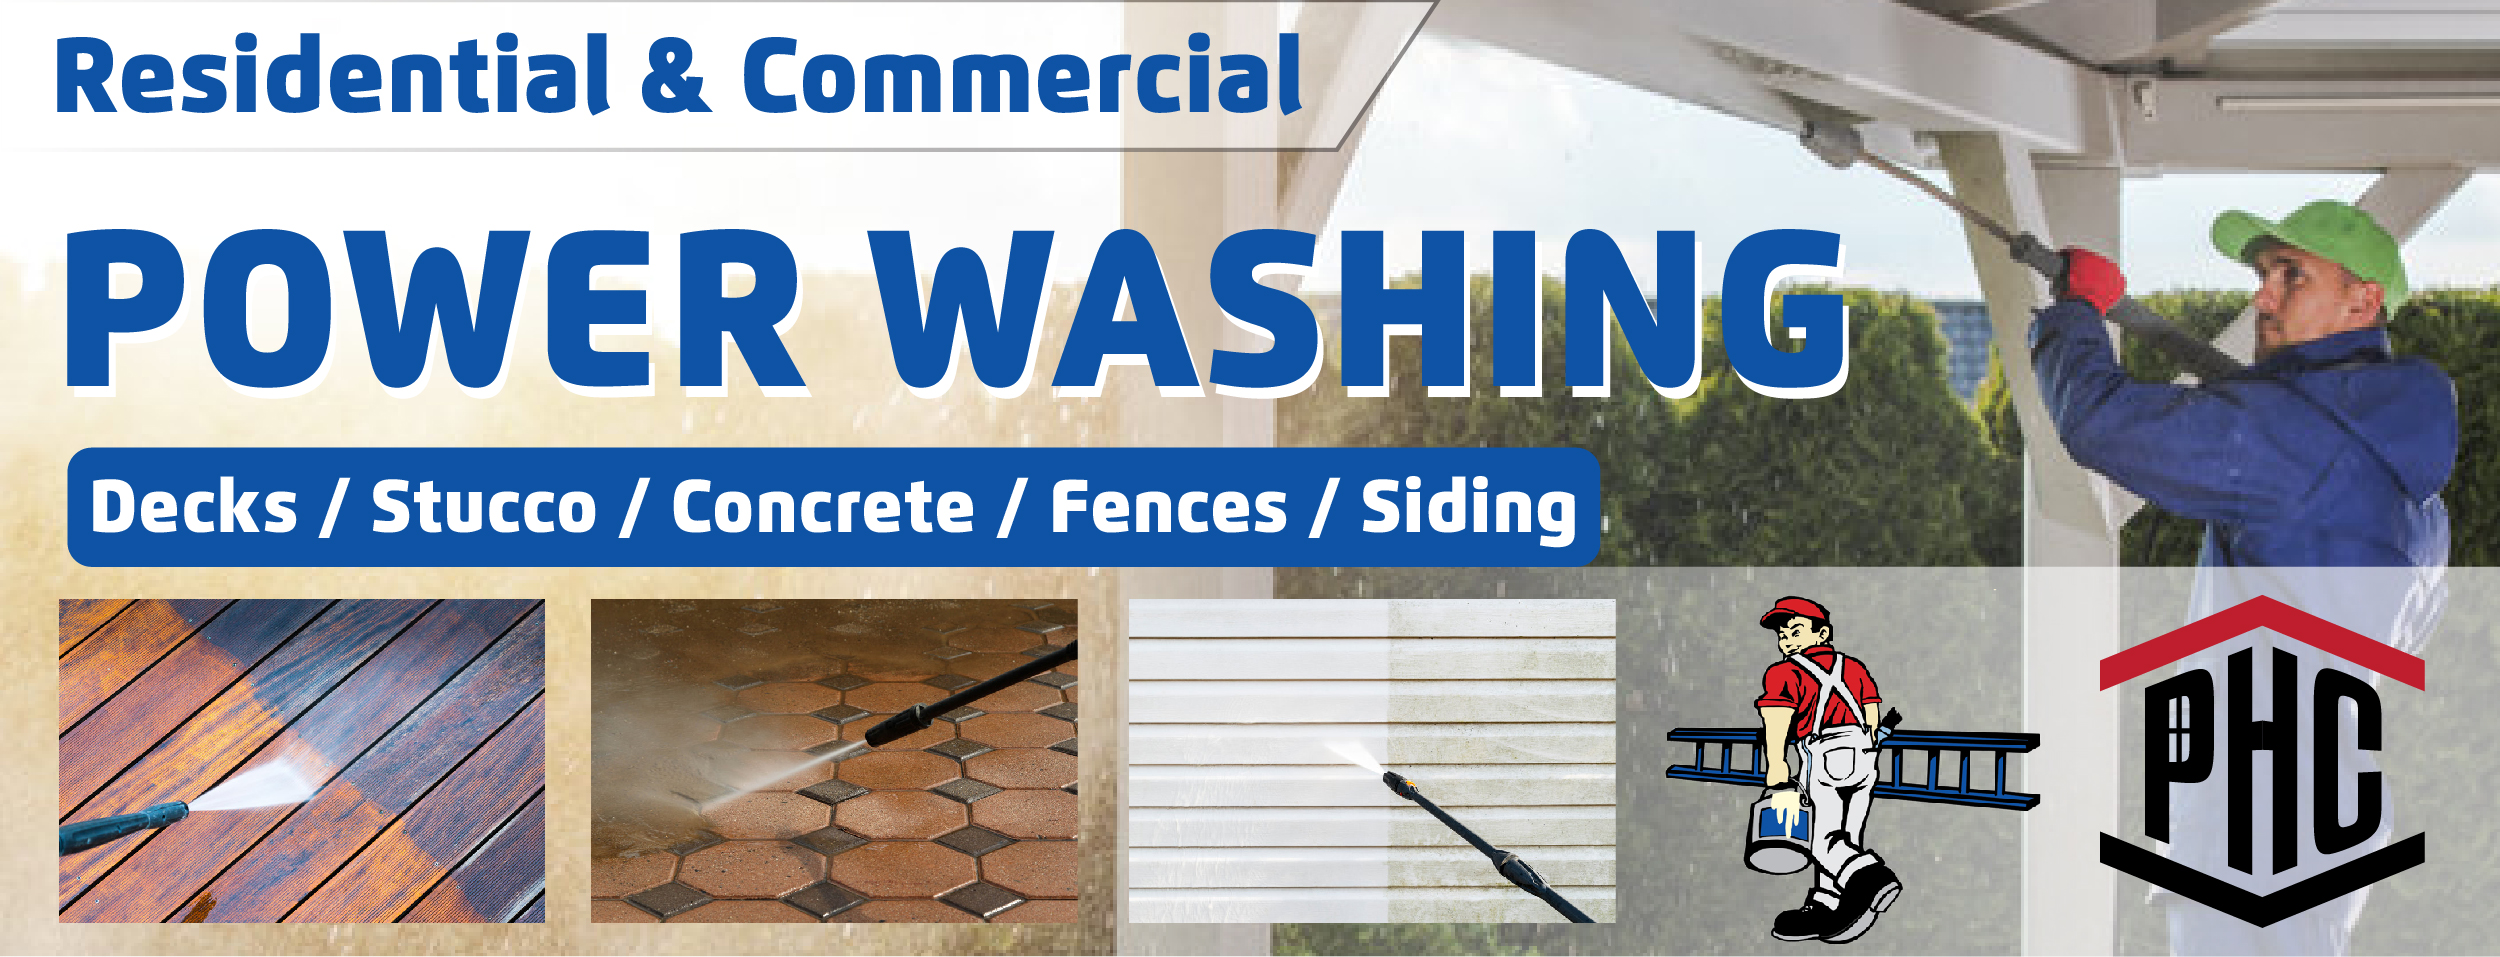 Professional Power washing Company in Albuquerque ABQ